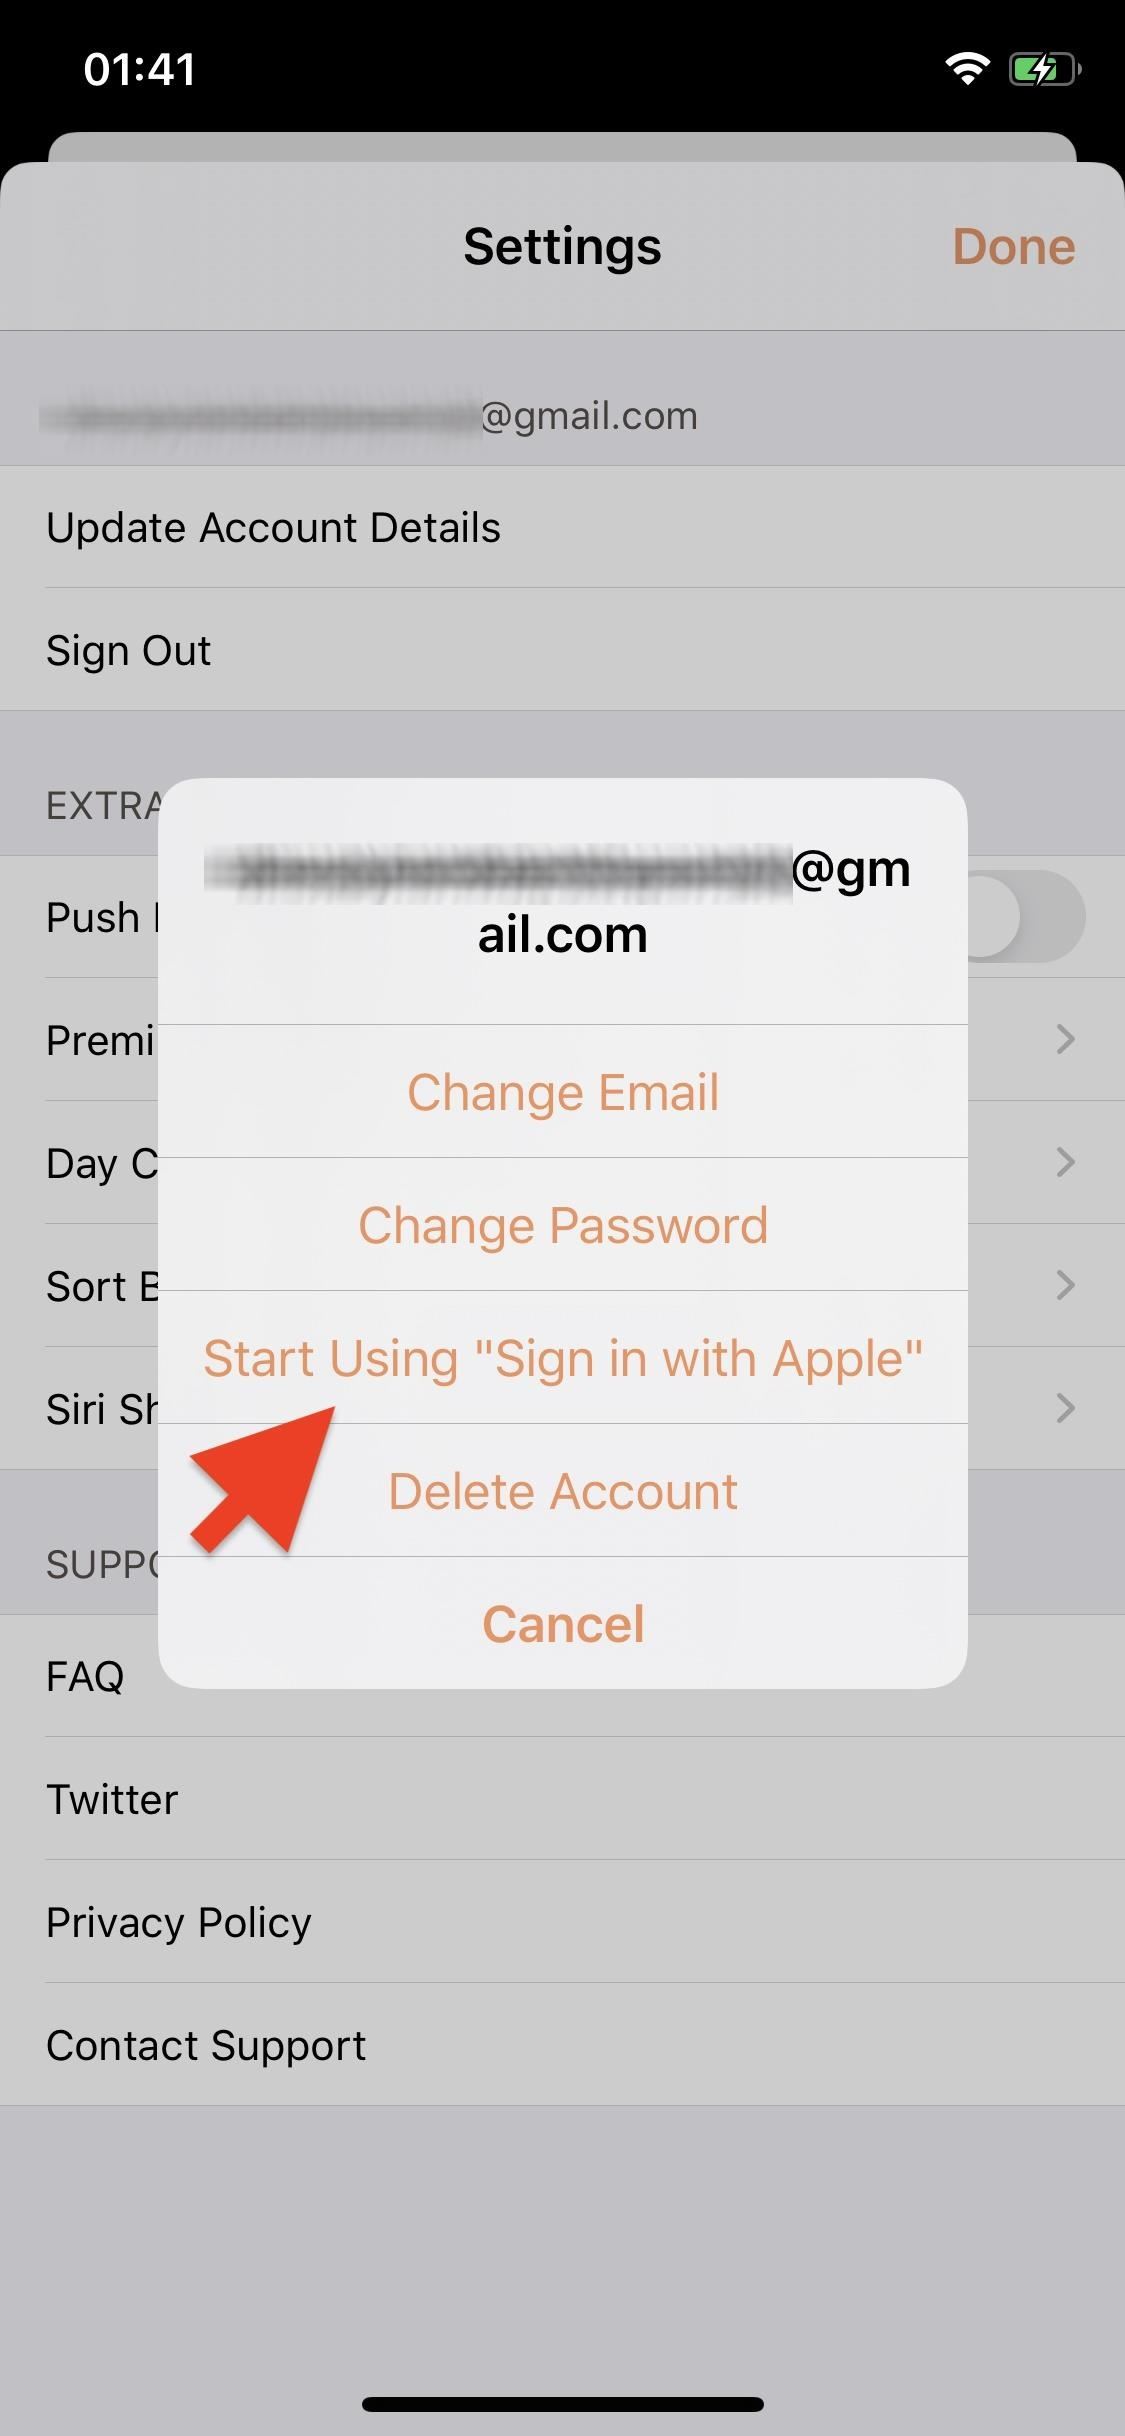 Use 'Sign in with Apple' on iOS 13 for Better Security & Privacy